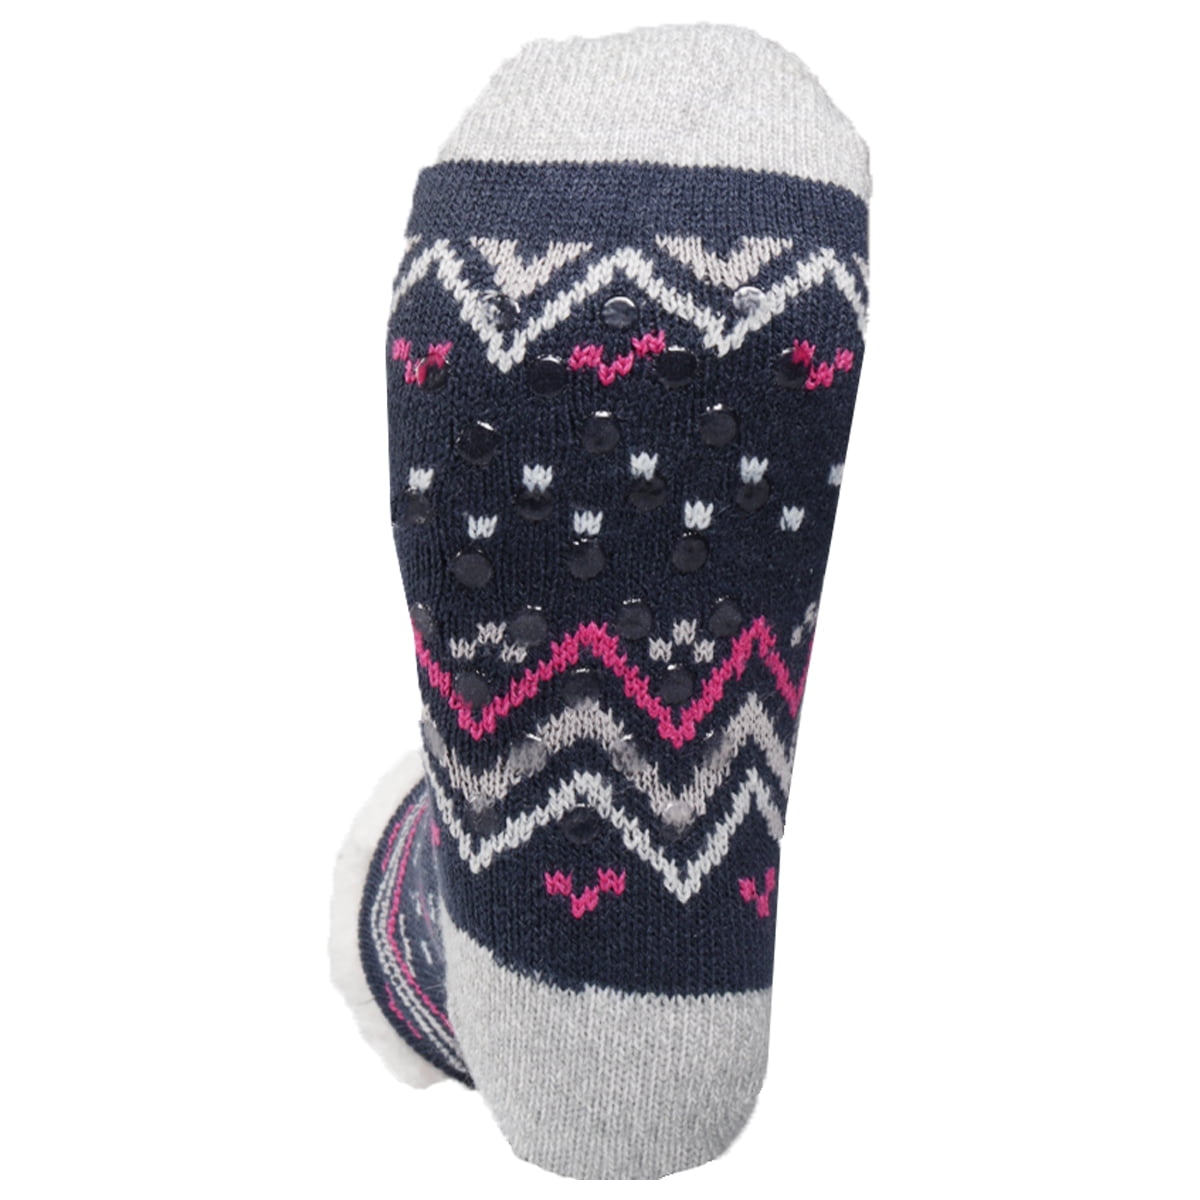 Treehouse Knit (2 Pack) Colorful Womens Thick Knit Winter Sherpa Fleece  Slipper Socks Grippers 